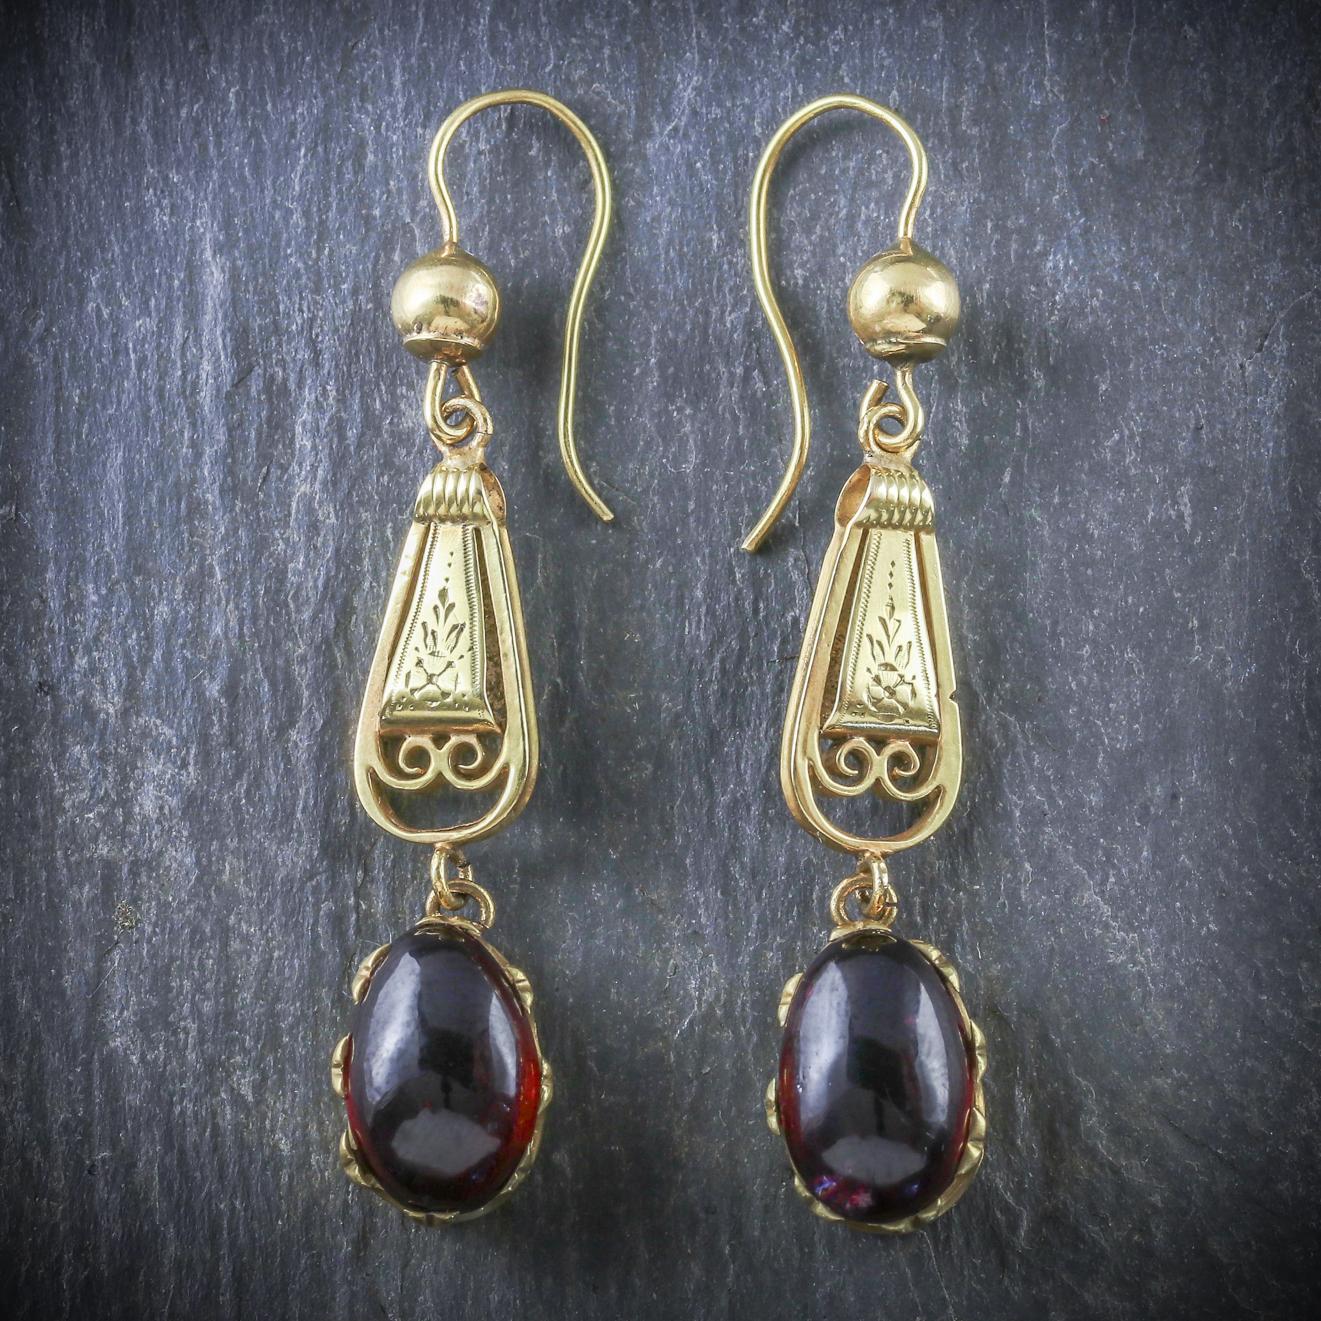 A pair of fabulous antique Cabochon Garnet drop earrings that are from the Georgian era, Circa 1800

Each earring displays a beautiful deep red cabochon Garnet which are 4ct each

One of the Garnet’s has a small hair line fault but this is minimal